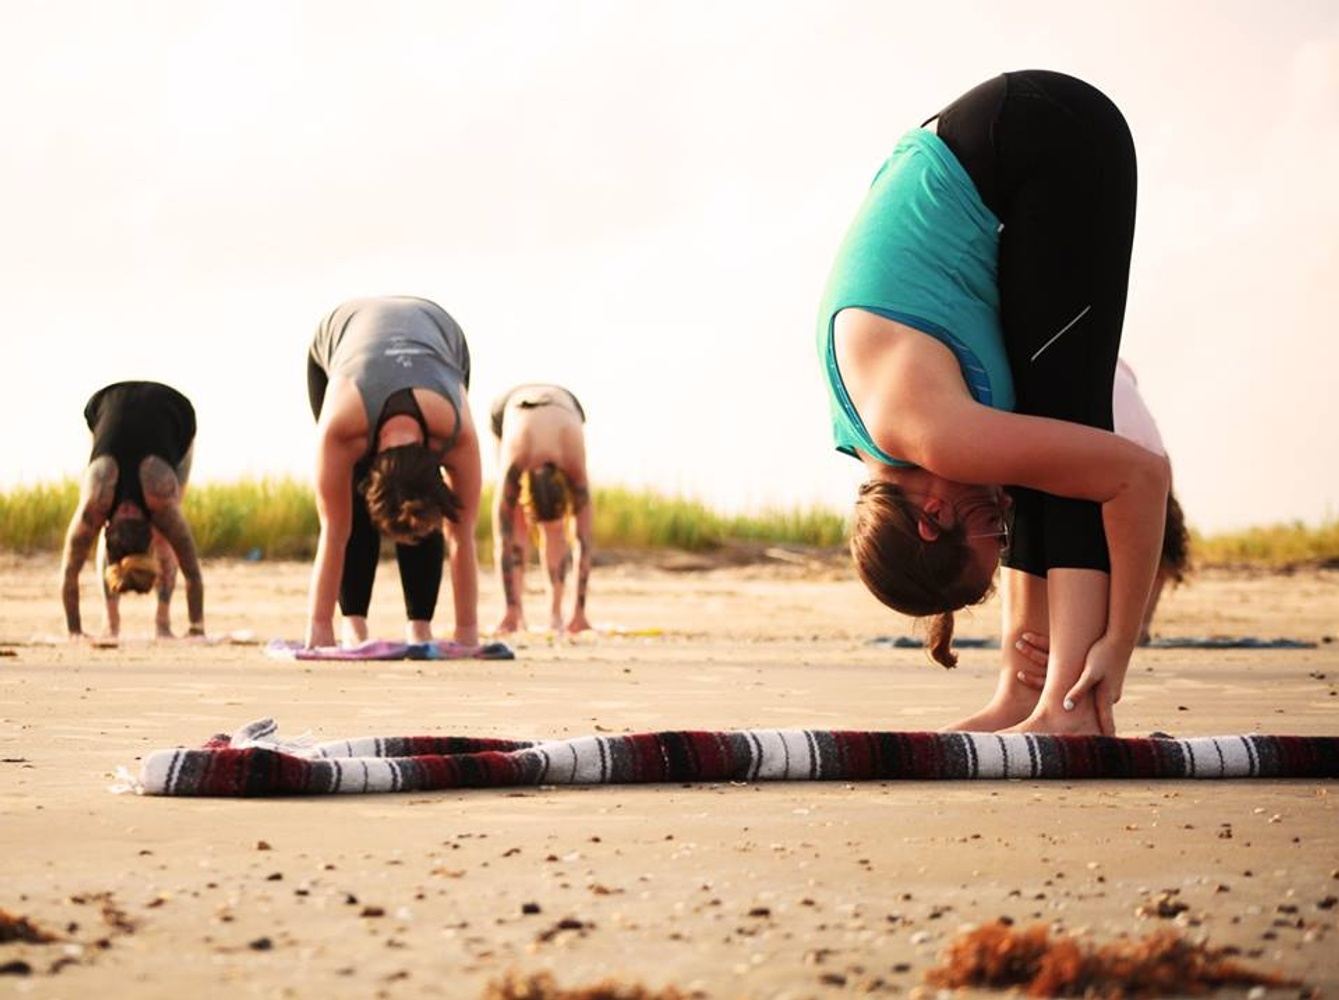 Beachside Bliss - A Yoga Retreat to Flow, Play, Rest, and Renew